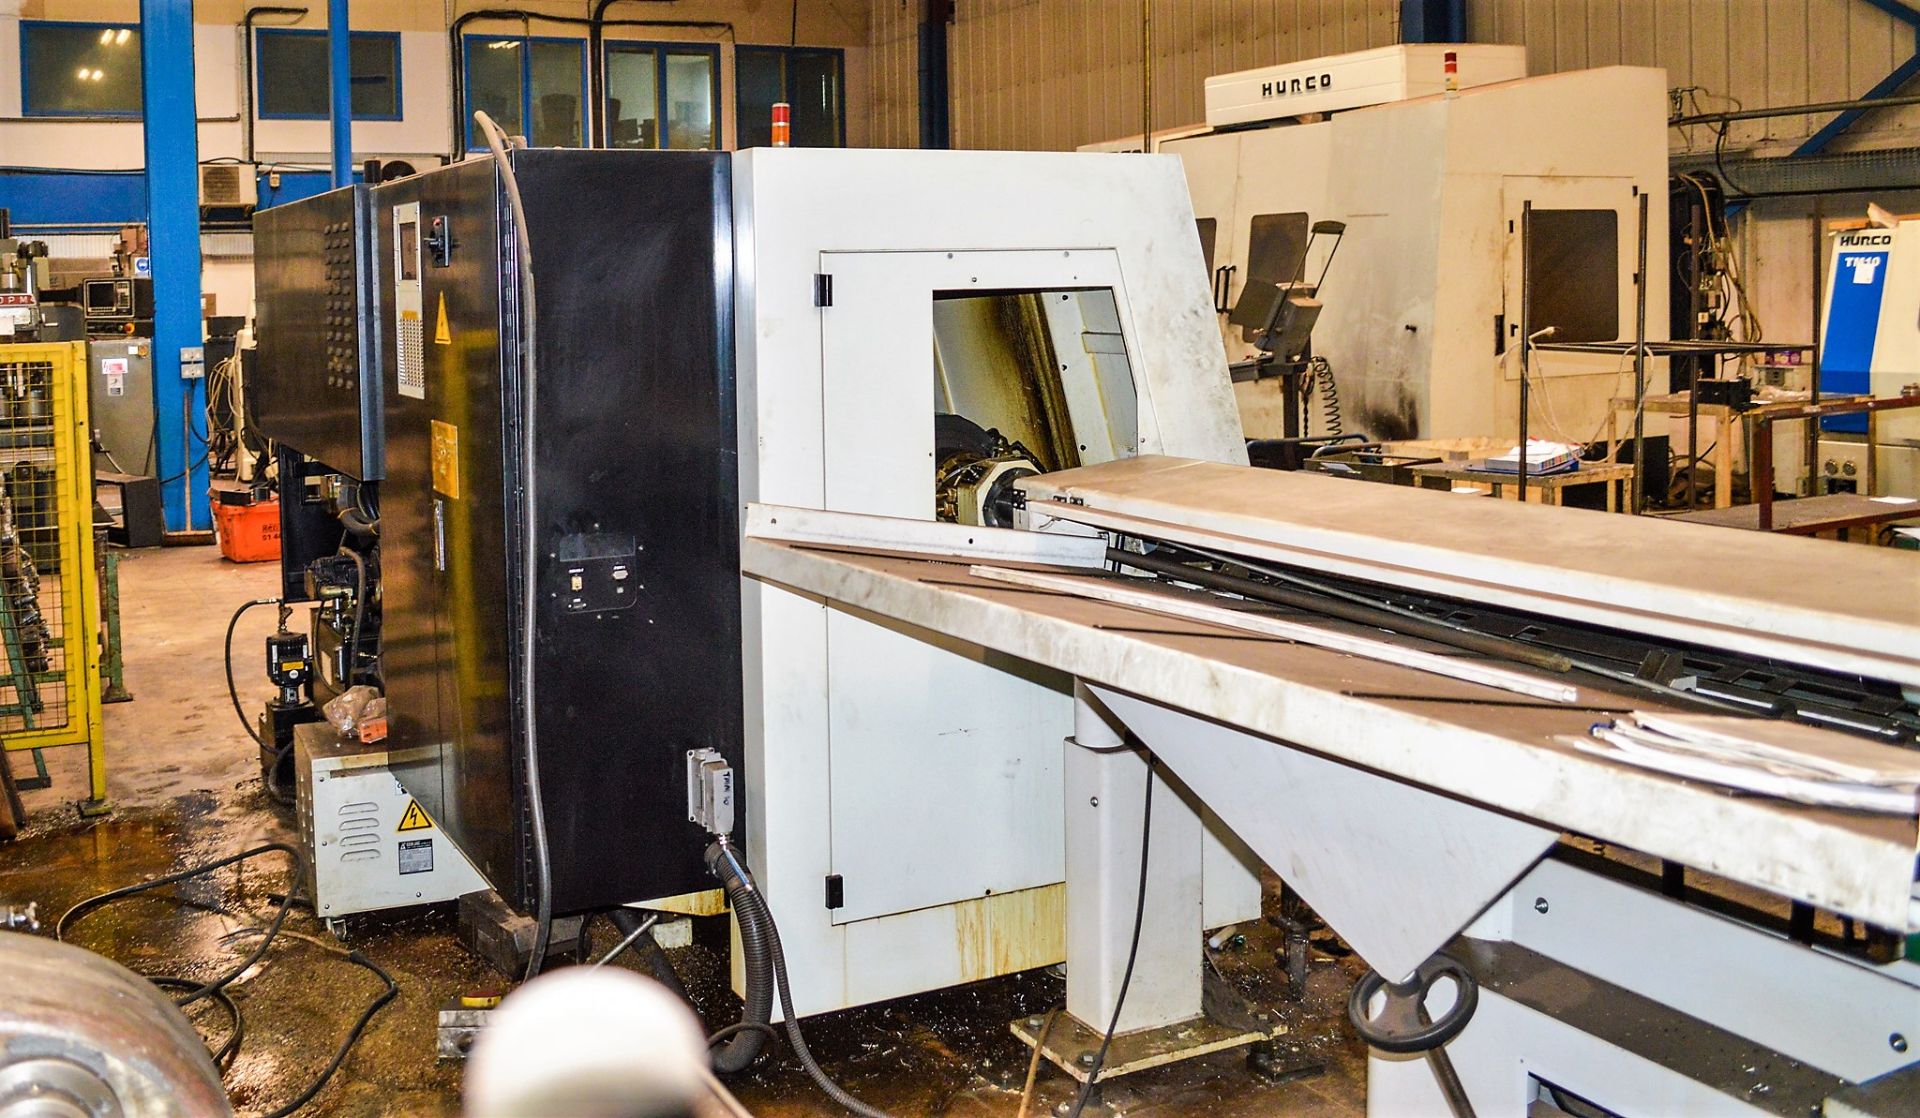 Hurco TMM10 CNC slant bed lathe S/N: 11102100AAB c/w 12 station tool charge, headstock, Hurlo Max - Image 6 of 6